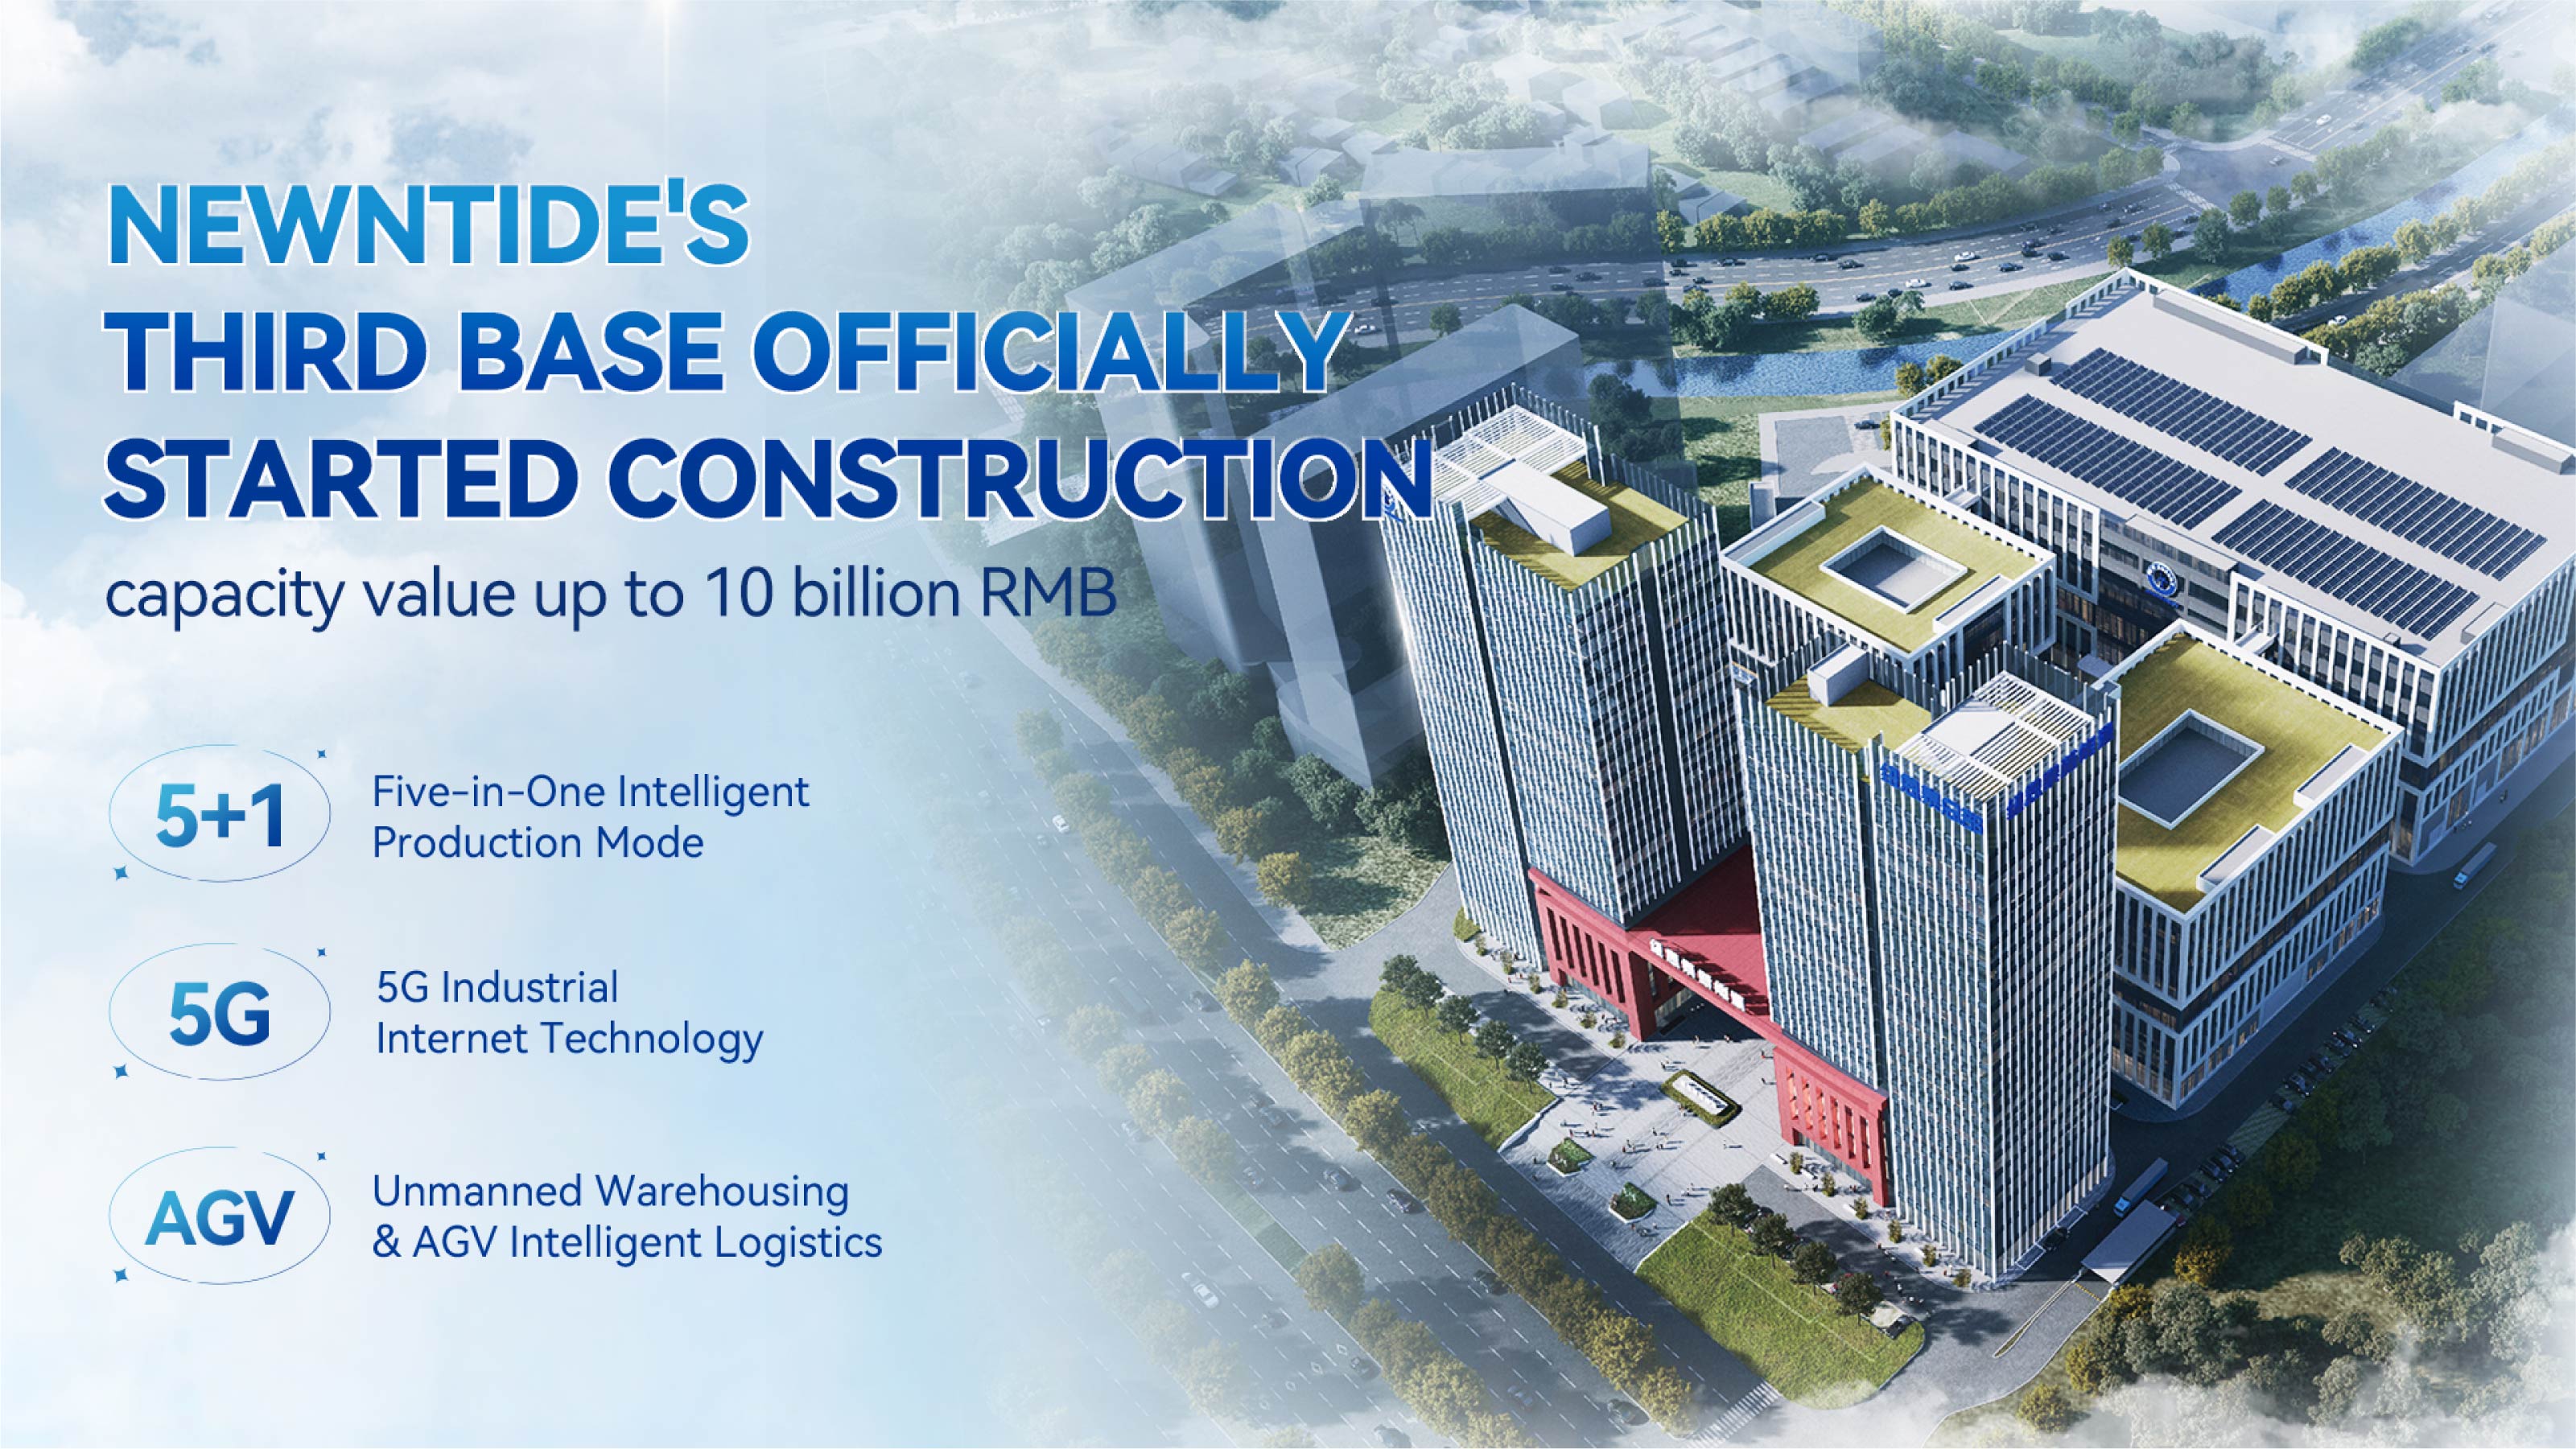 NEWNTIDE's third base officially started construction - capacity value up to 10 billion RMB